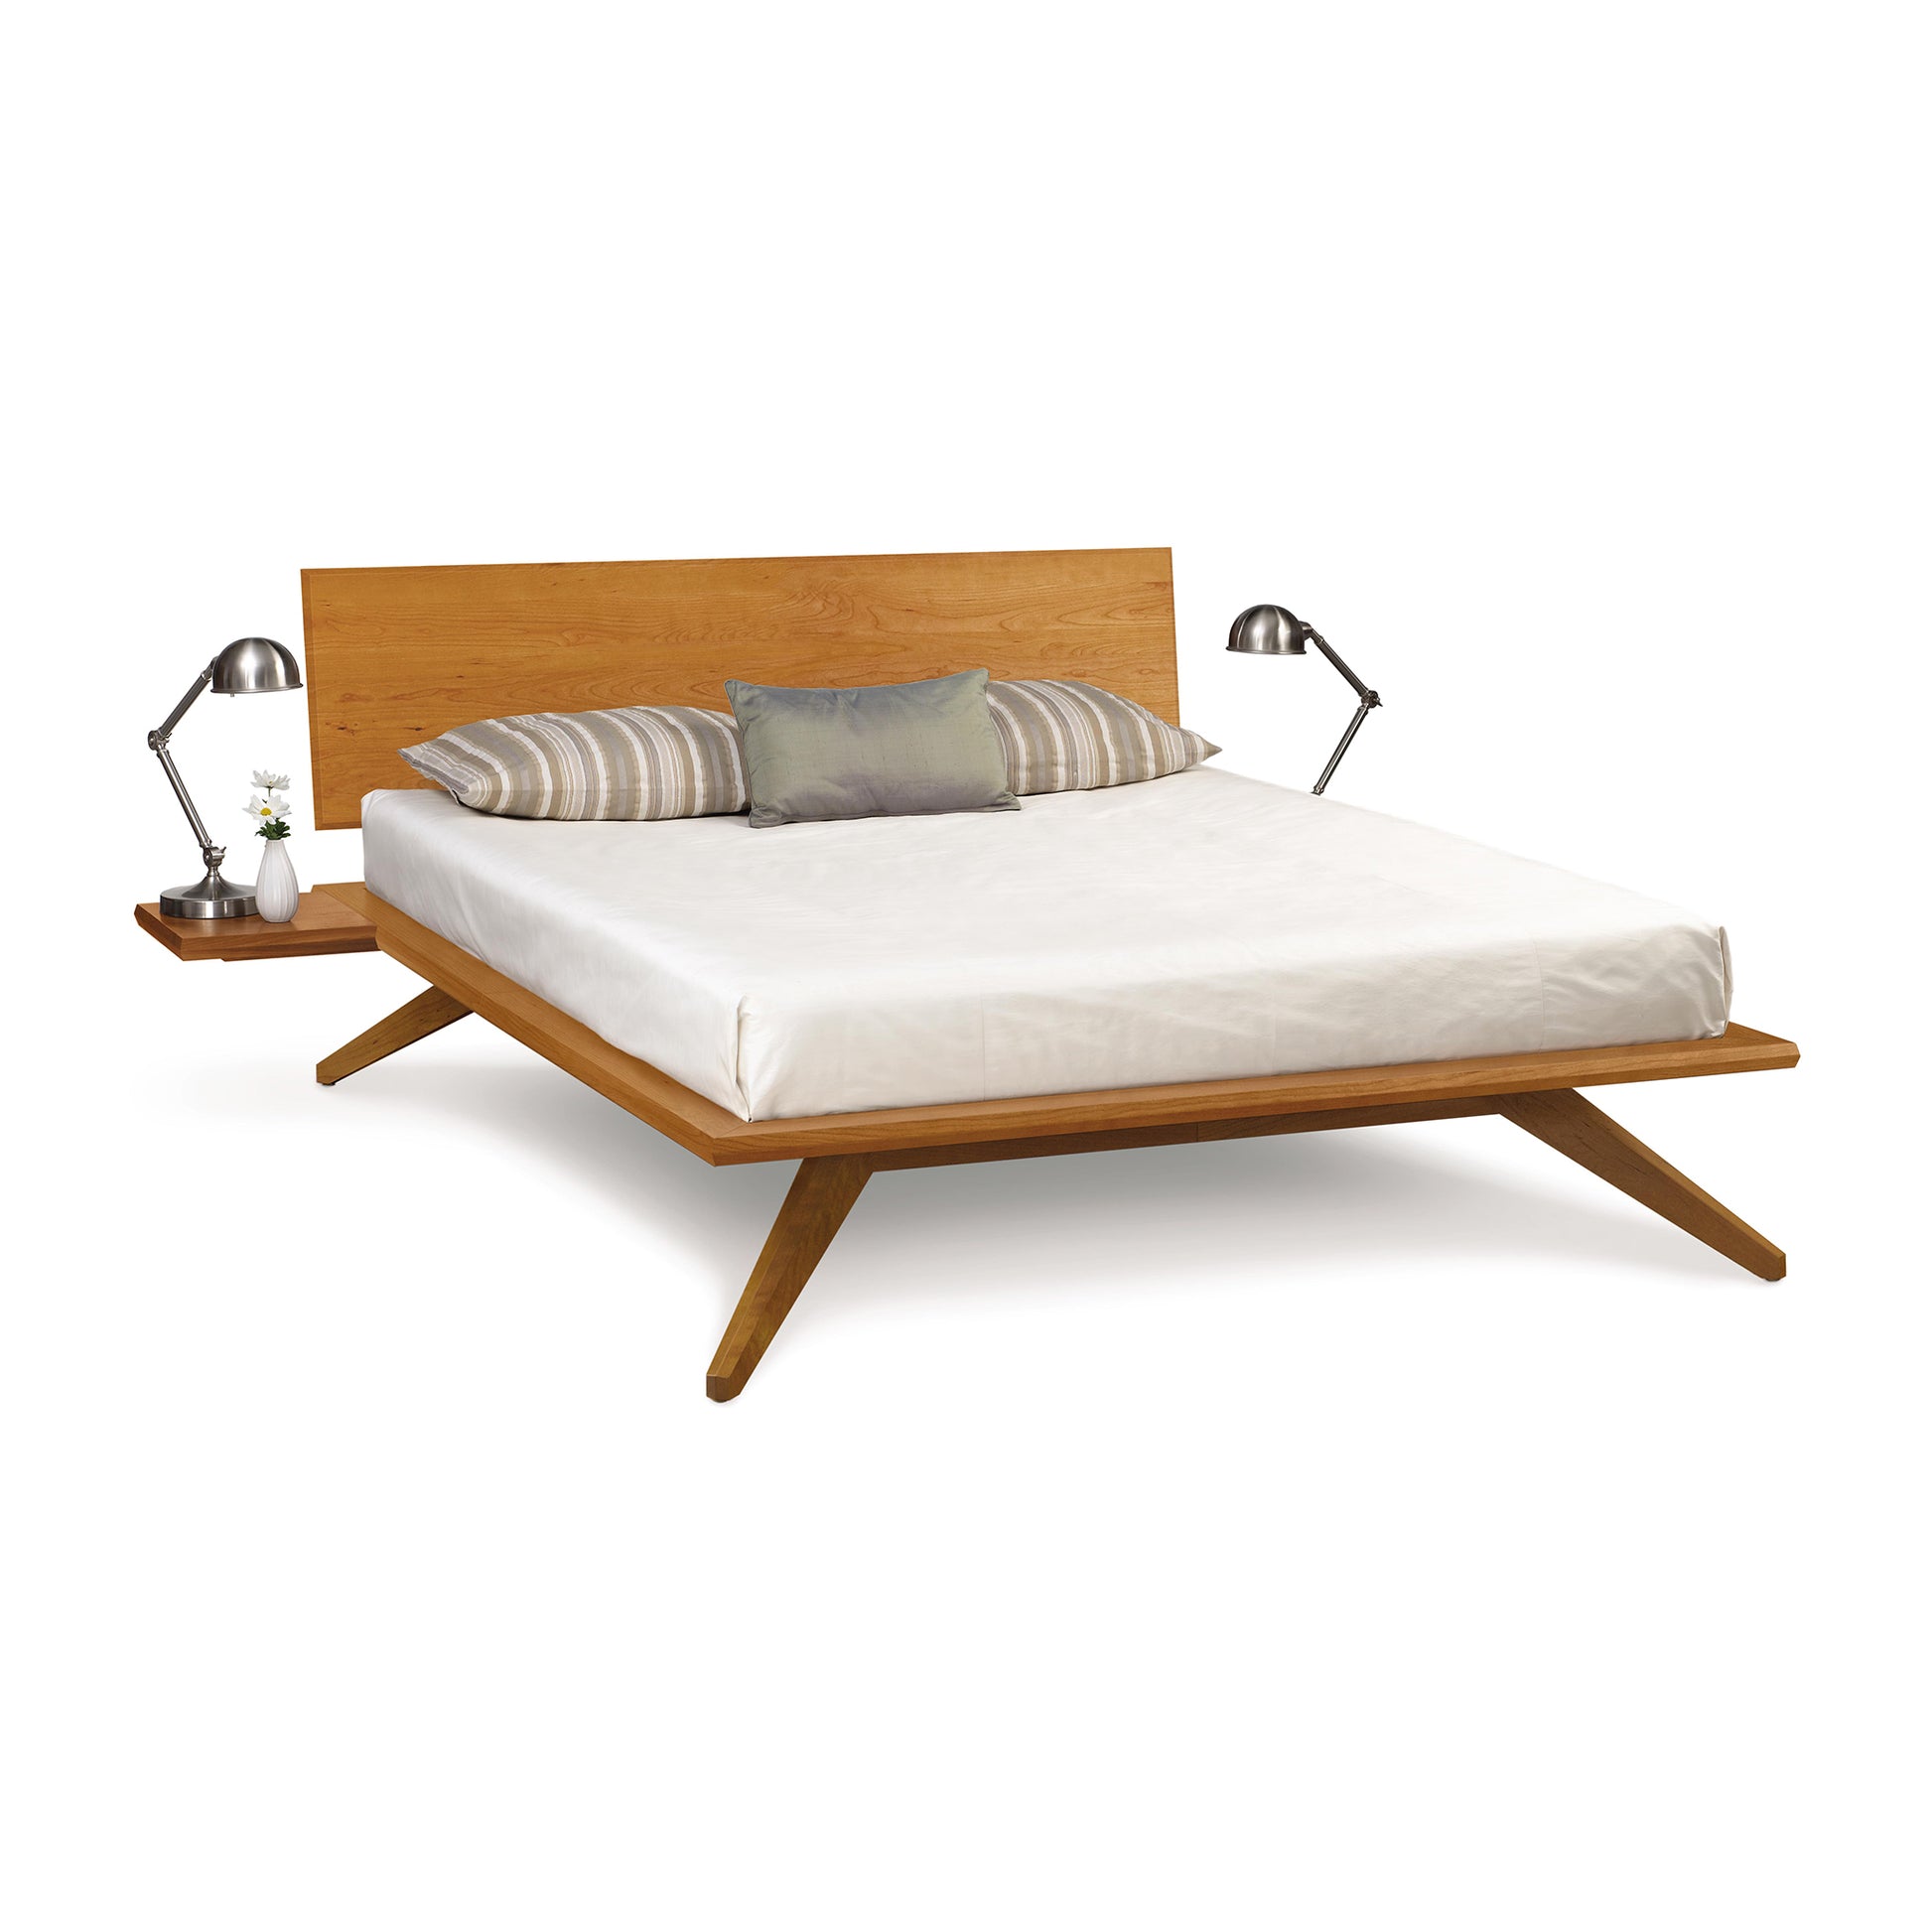 The Astrid Cherry Platform Bed by Copeland Furniture features a beautifully crafted wooden headboard and footboard. Made with eco-friendly, sustainably harvested solid cherry wood, this bed showcases a mid-century modern design.